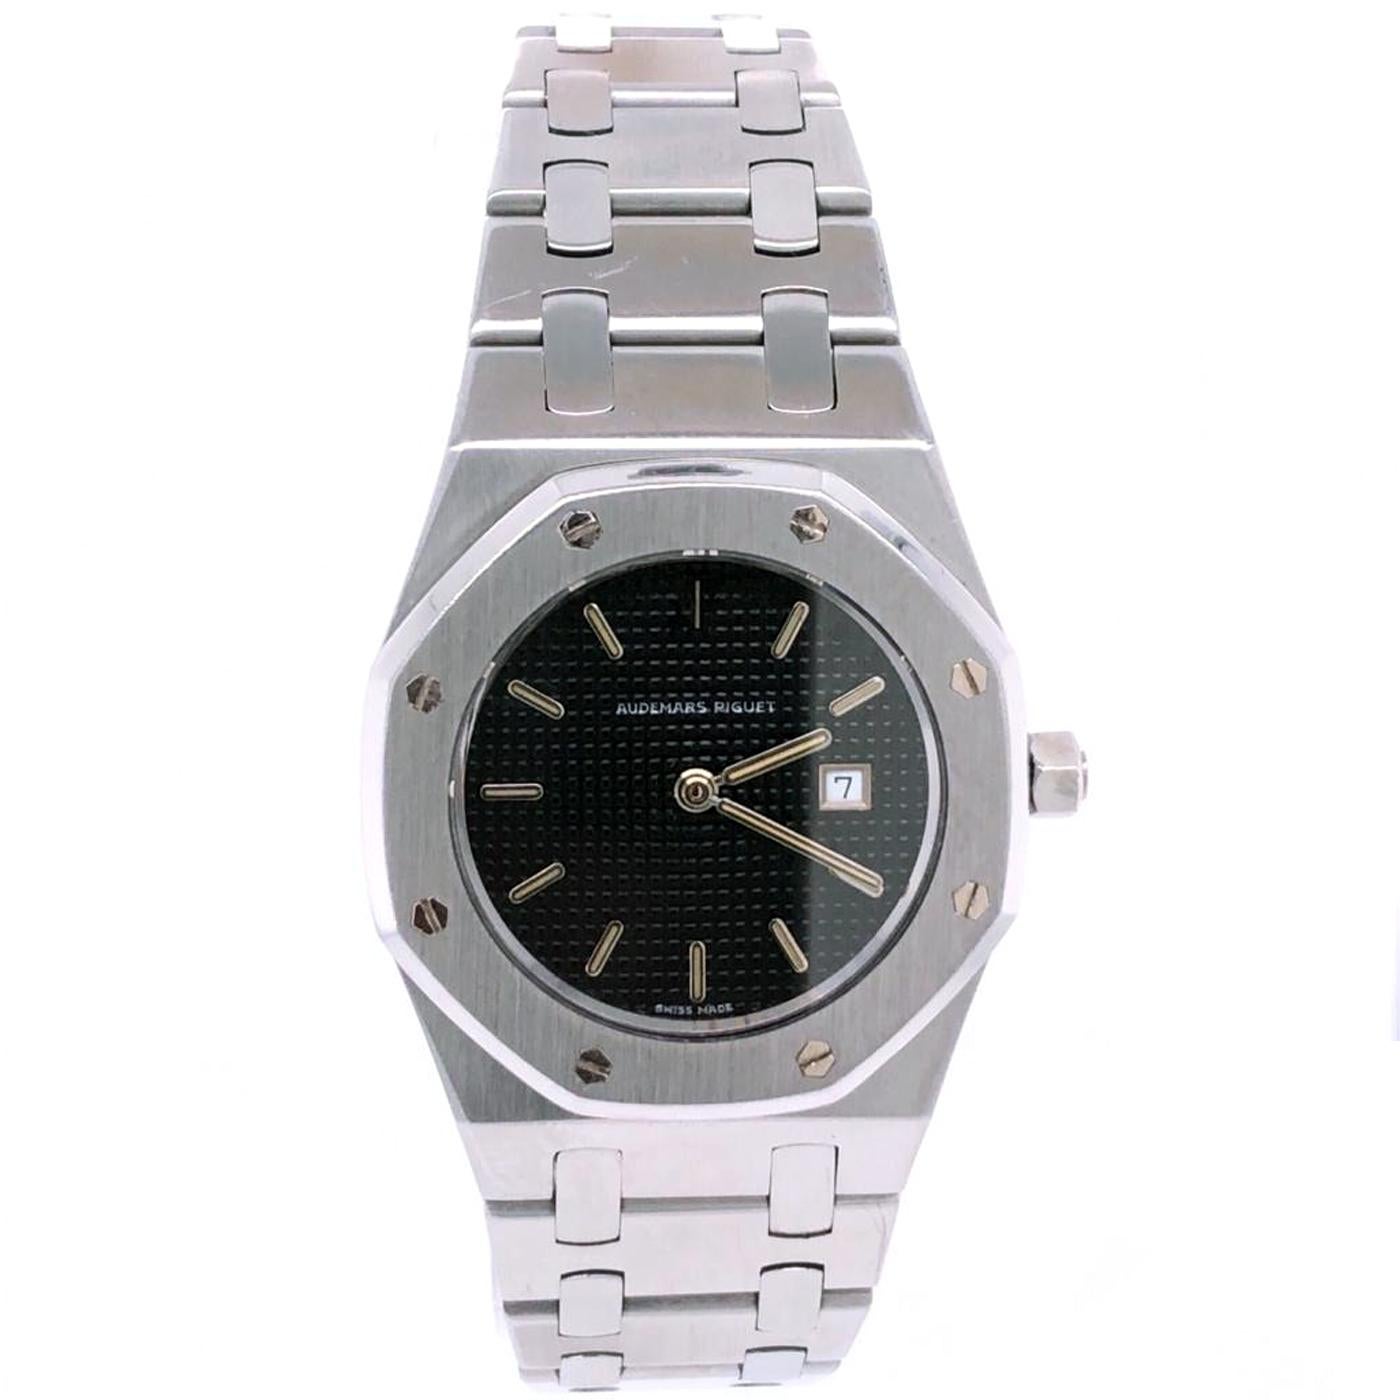 Silver-tone stainless steel case and bracelet. Fixed silver-tone stainless steel bezel. Blue dial with silver-tone hands and index hour markers. Minute markers around the outer rim. Dial Type: Analog. Luminescent hands and markers. The date is